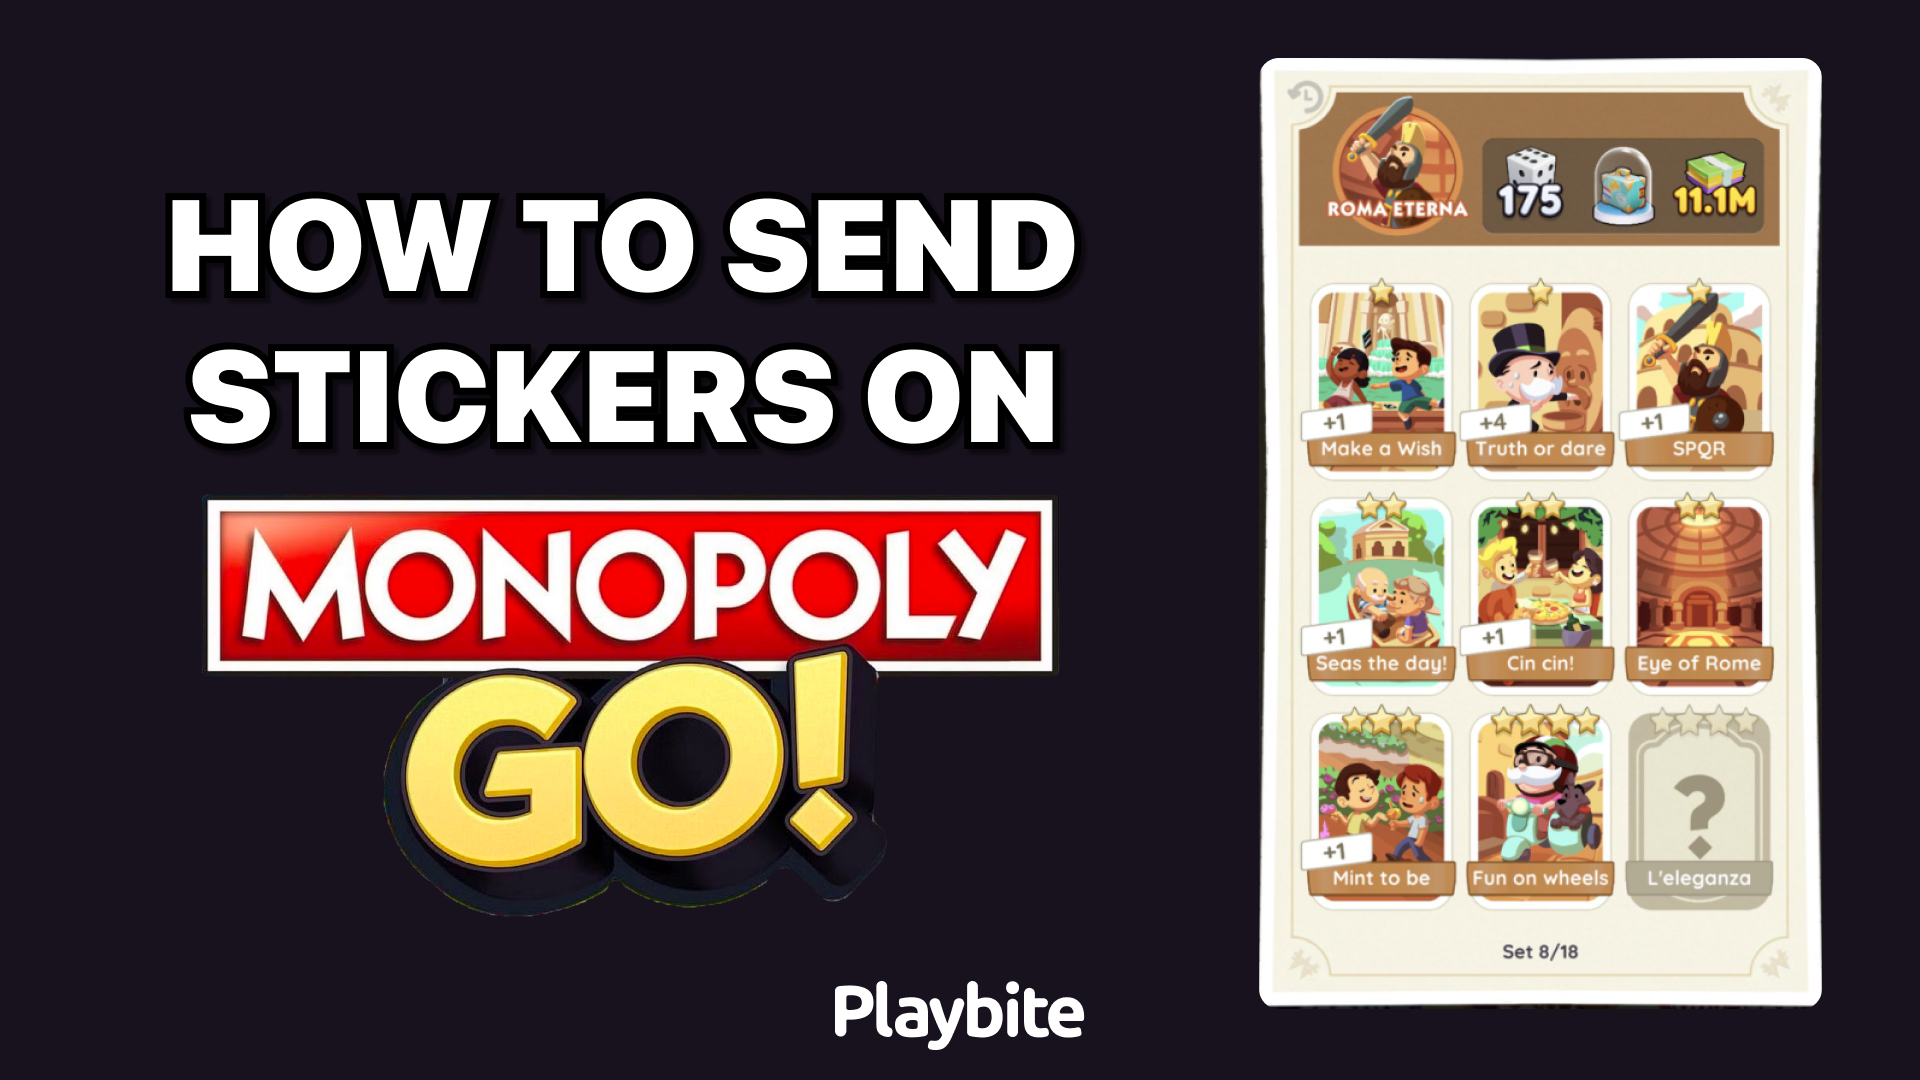 How To Send Stickers On Monopoly GO!?